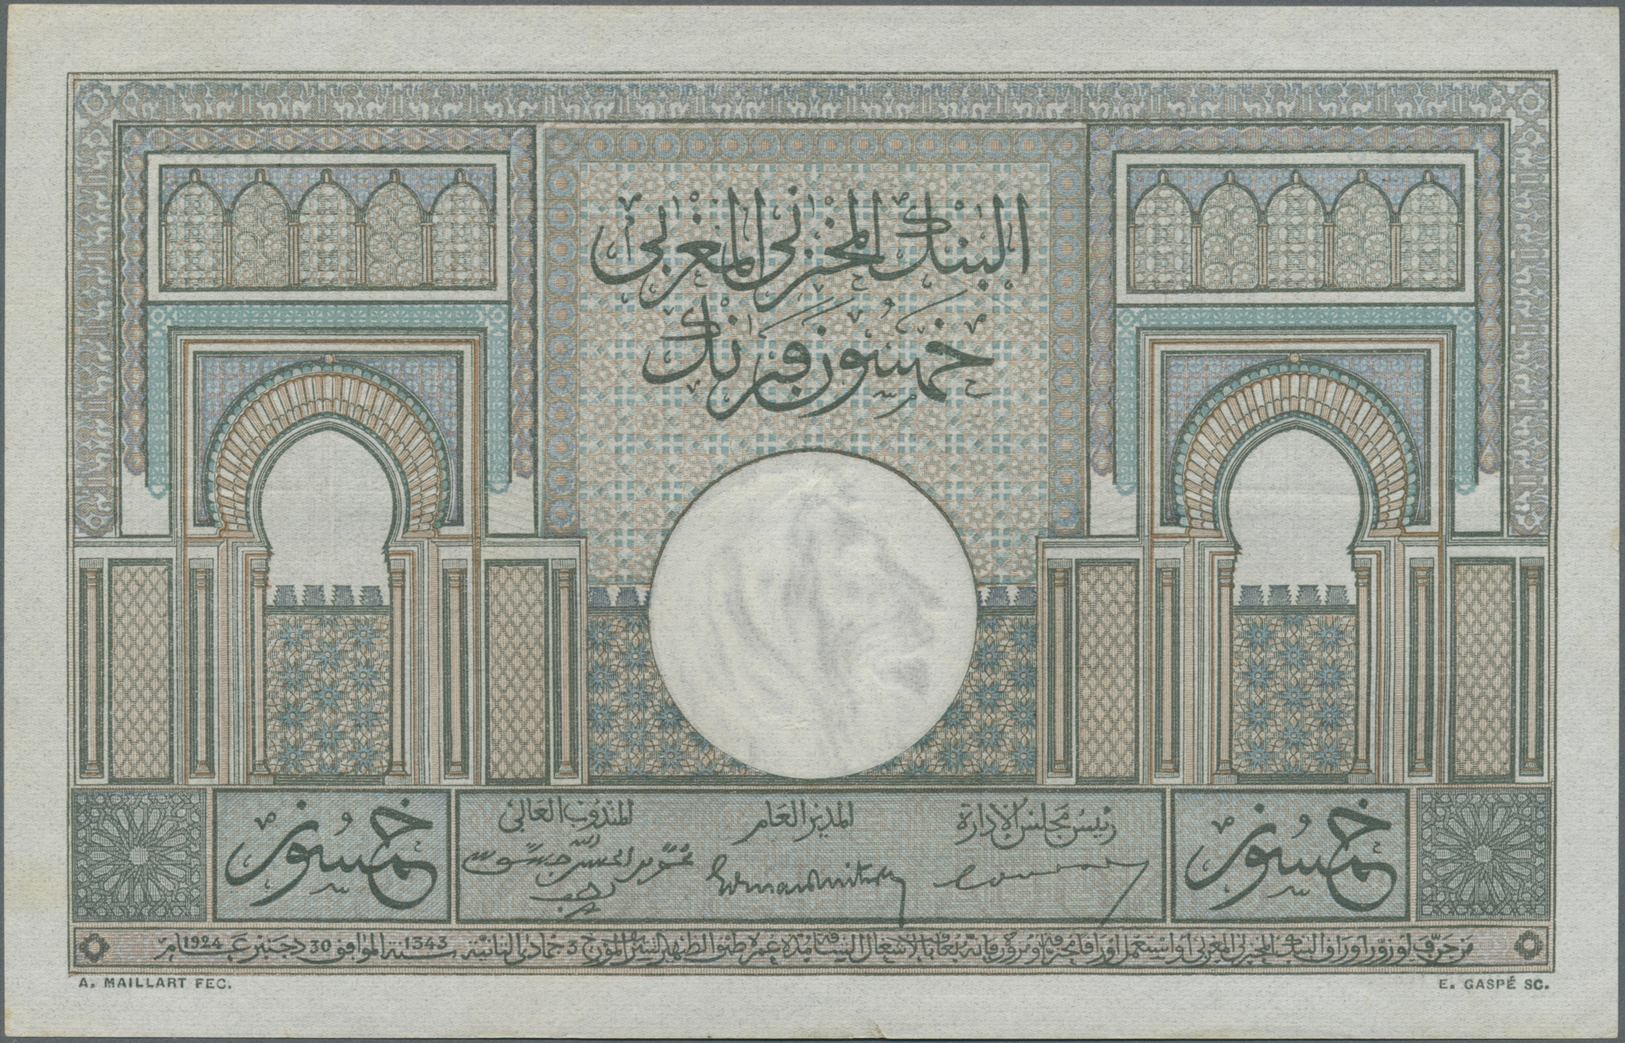 01744 Morocco / Marokko: 50 Francs 1947 P. 21, Light Folds And Handling In Paper, Not Washed Or Pressed, No Holes Or Tea - Morocco